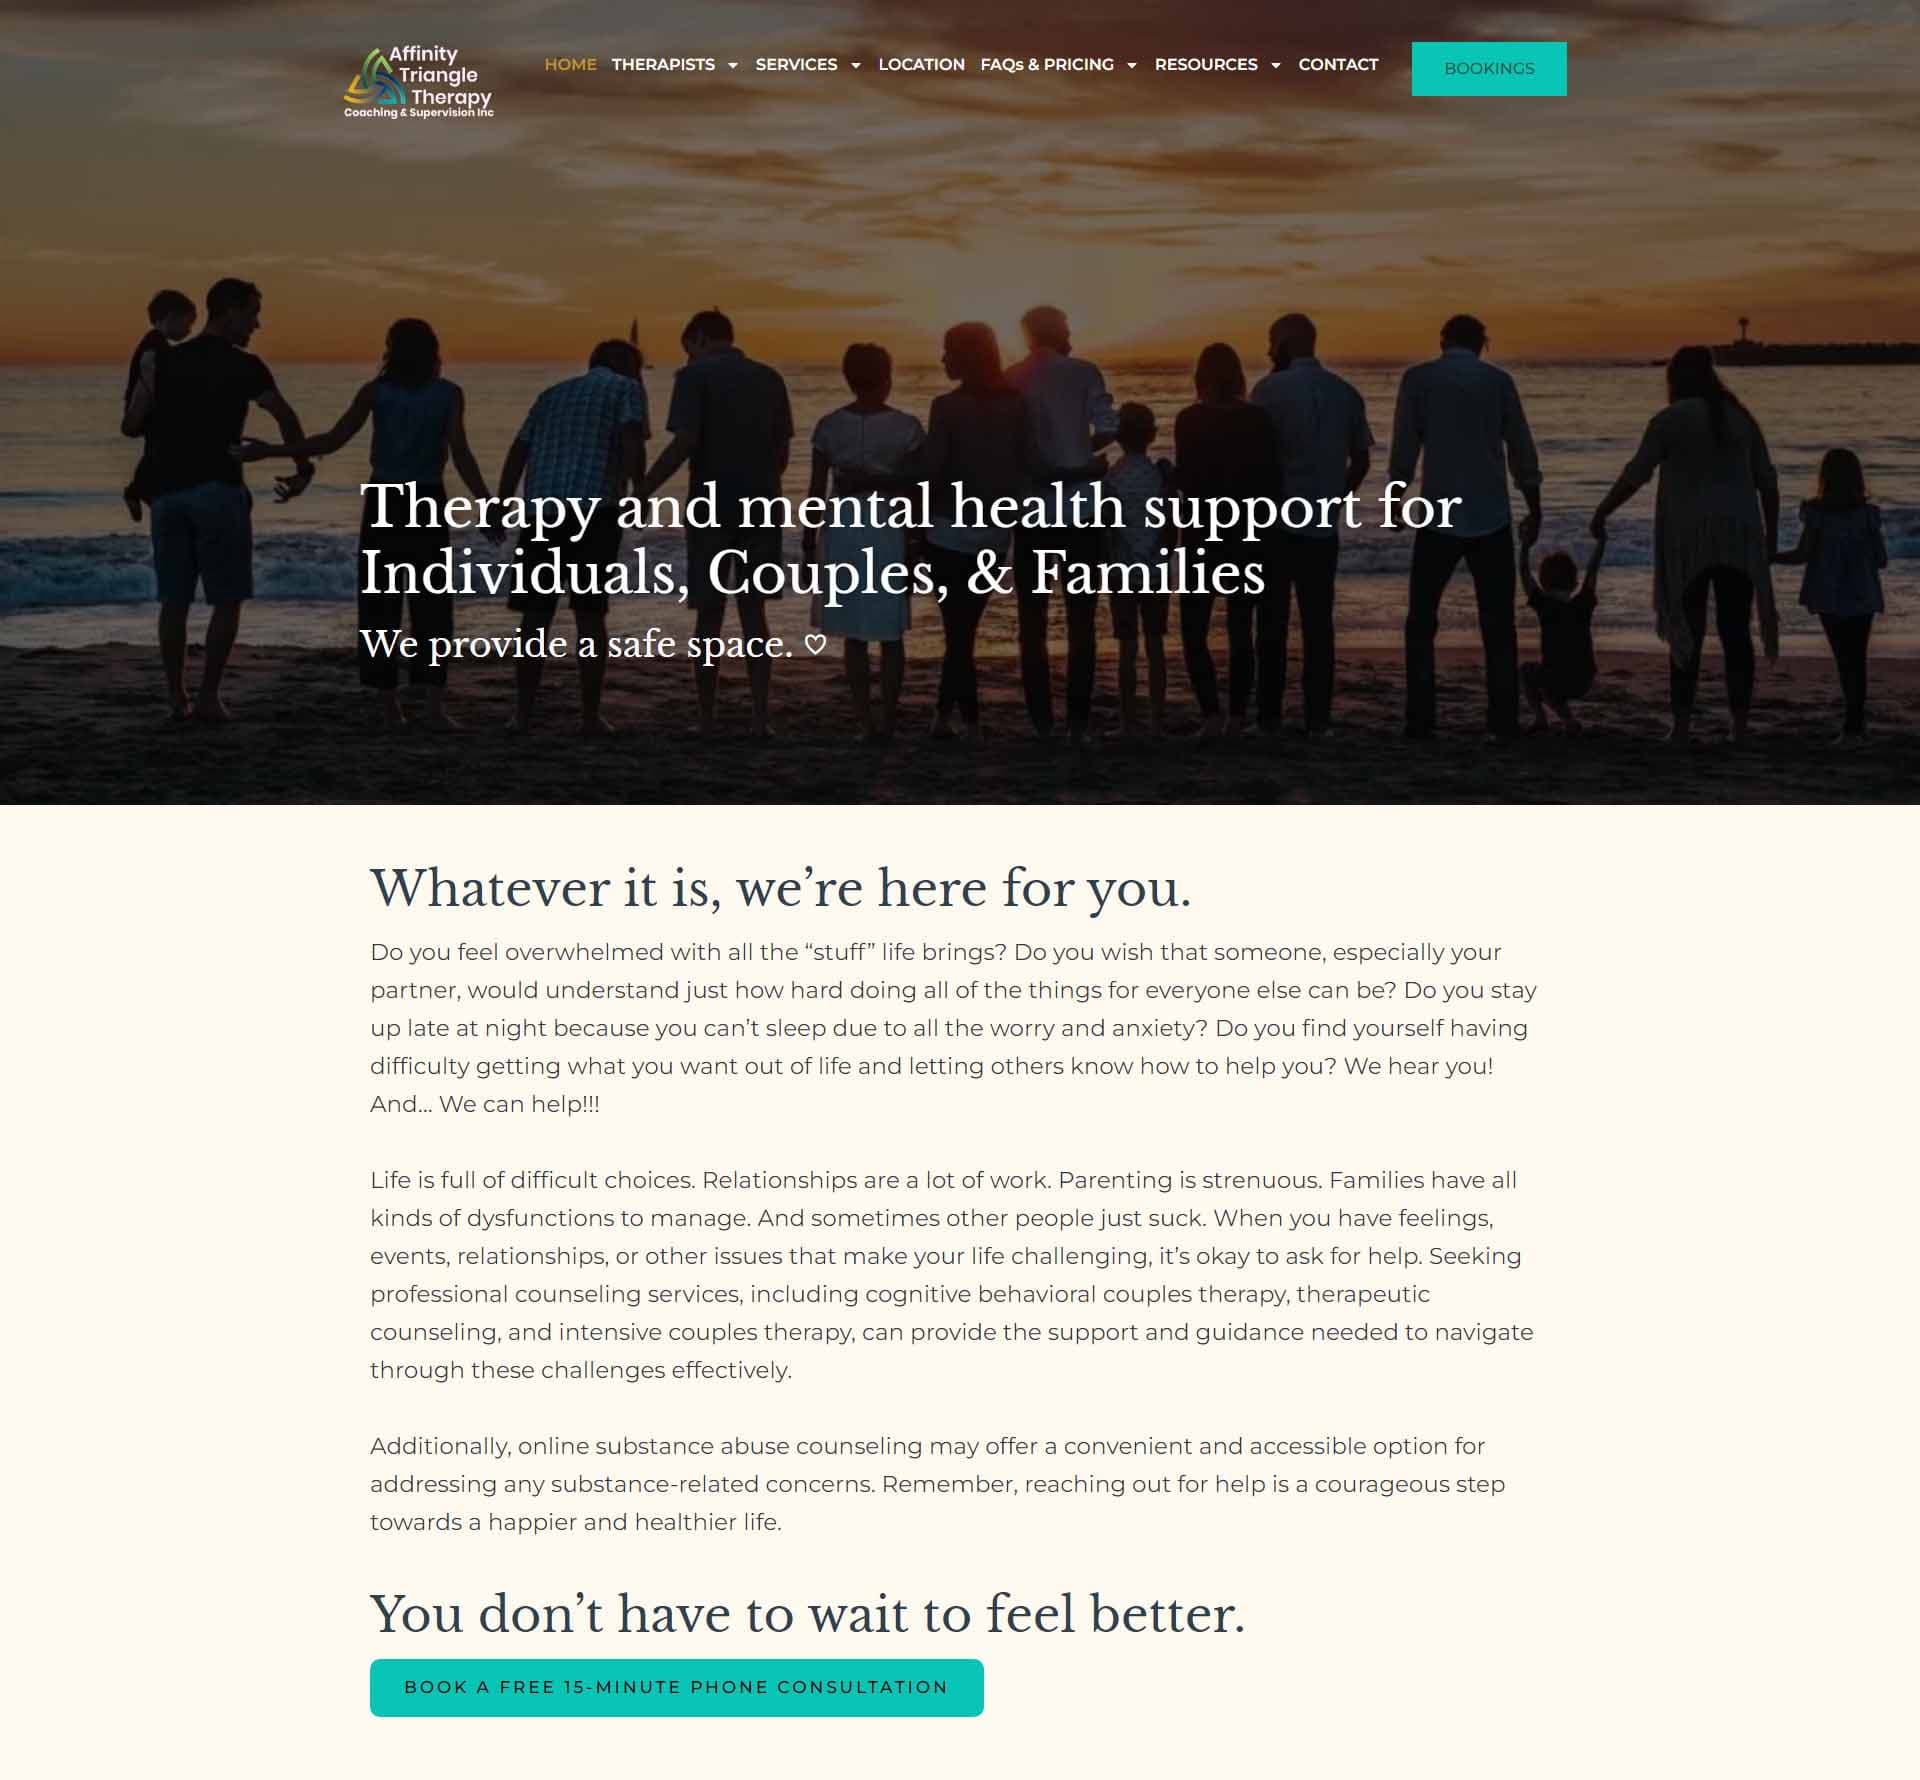 Therapy website design |Affinity Triangle